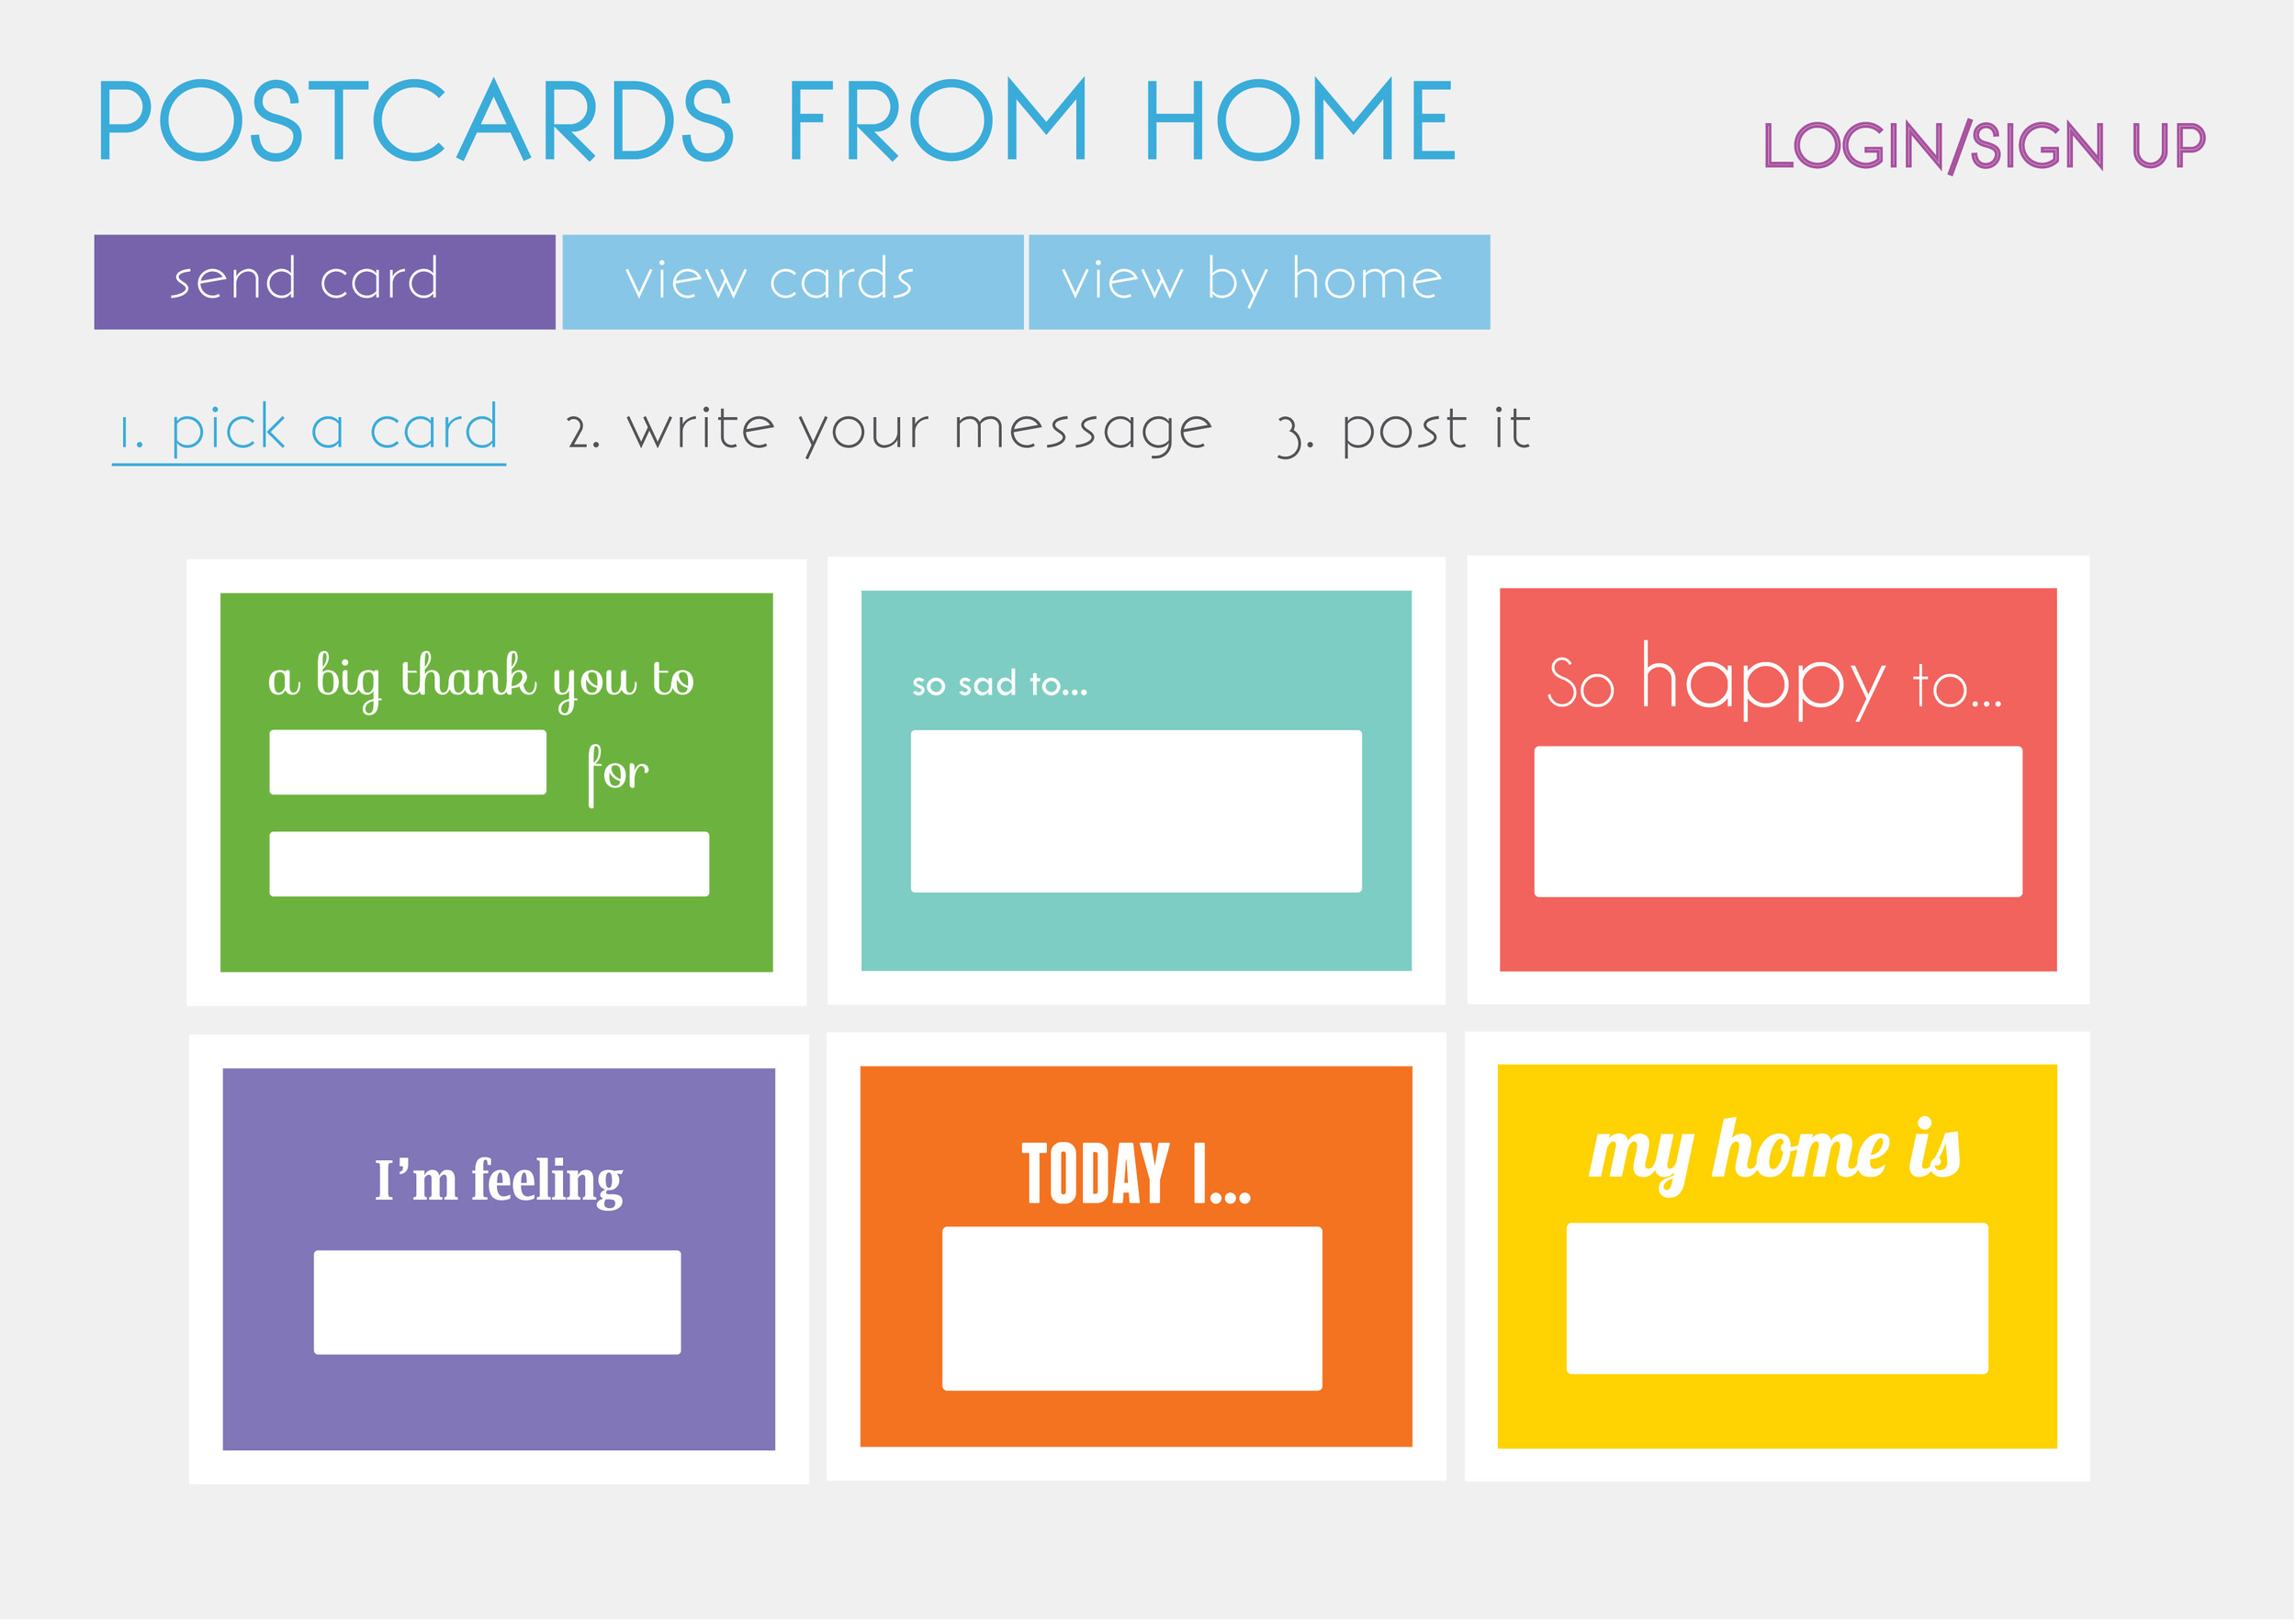 postcards from home interface_all-1.jpg